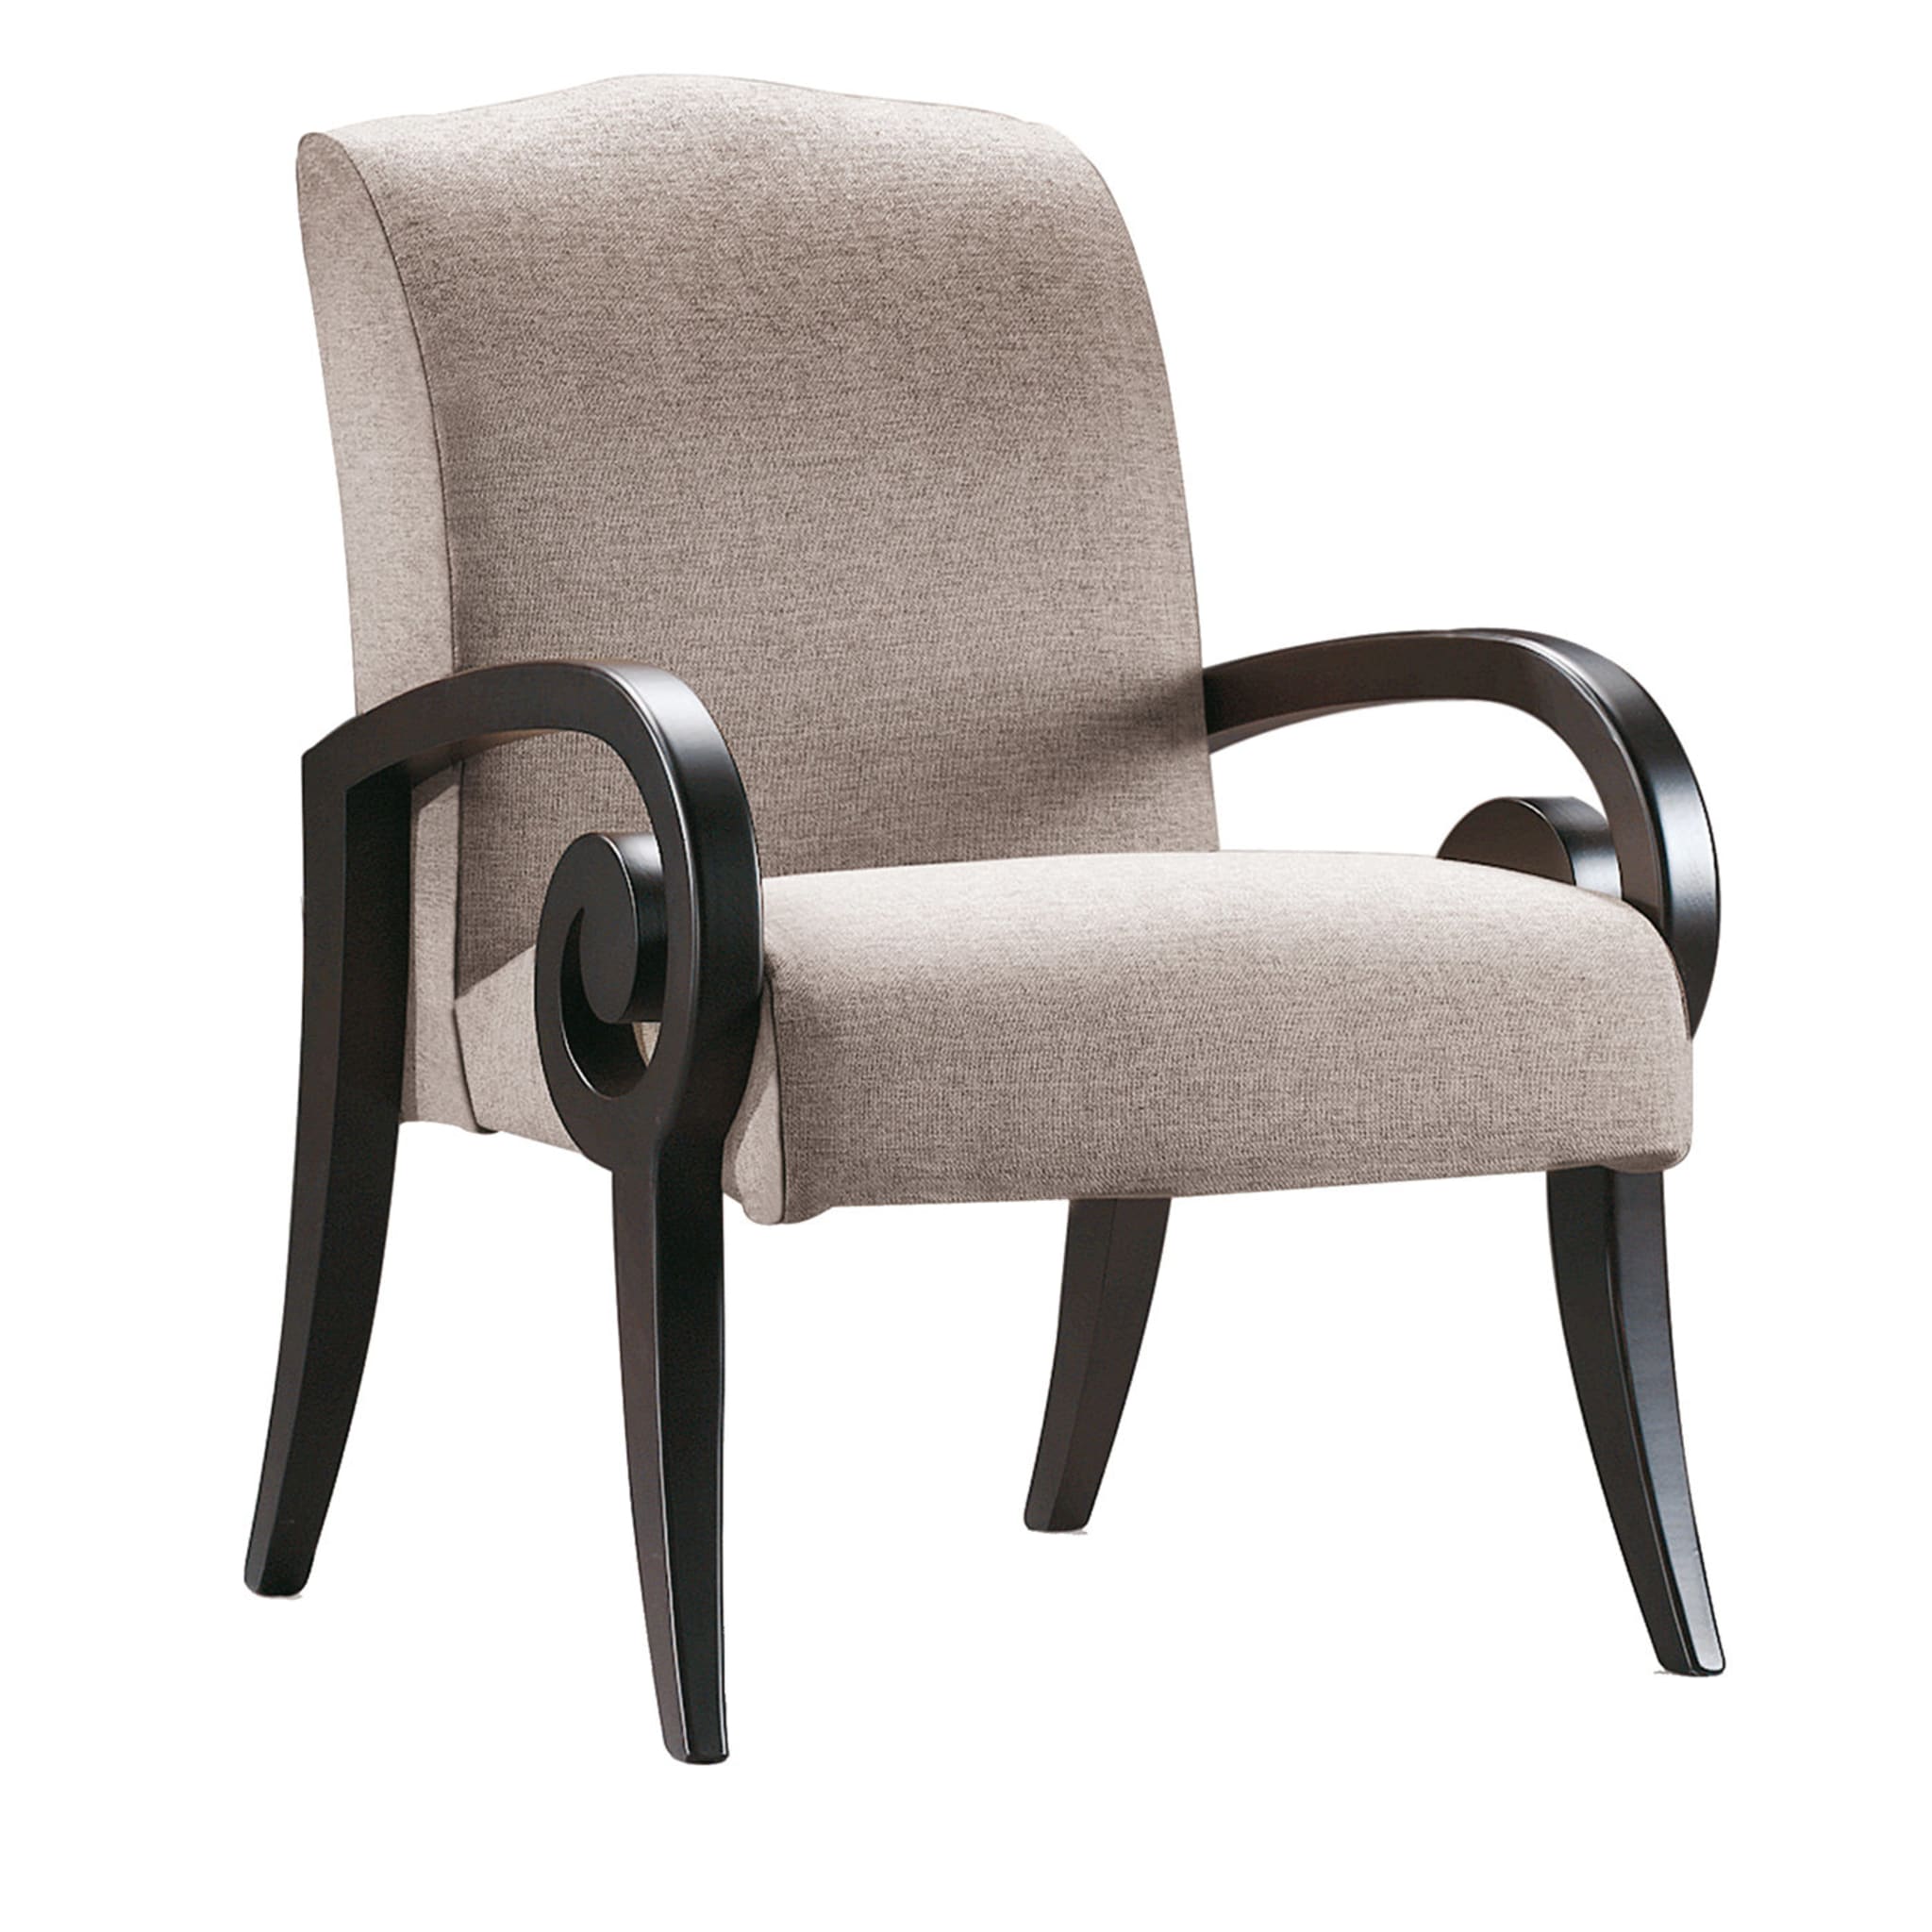 Brown Tulipwood Armchair with Curled Armrests - Main view